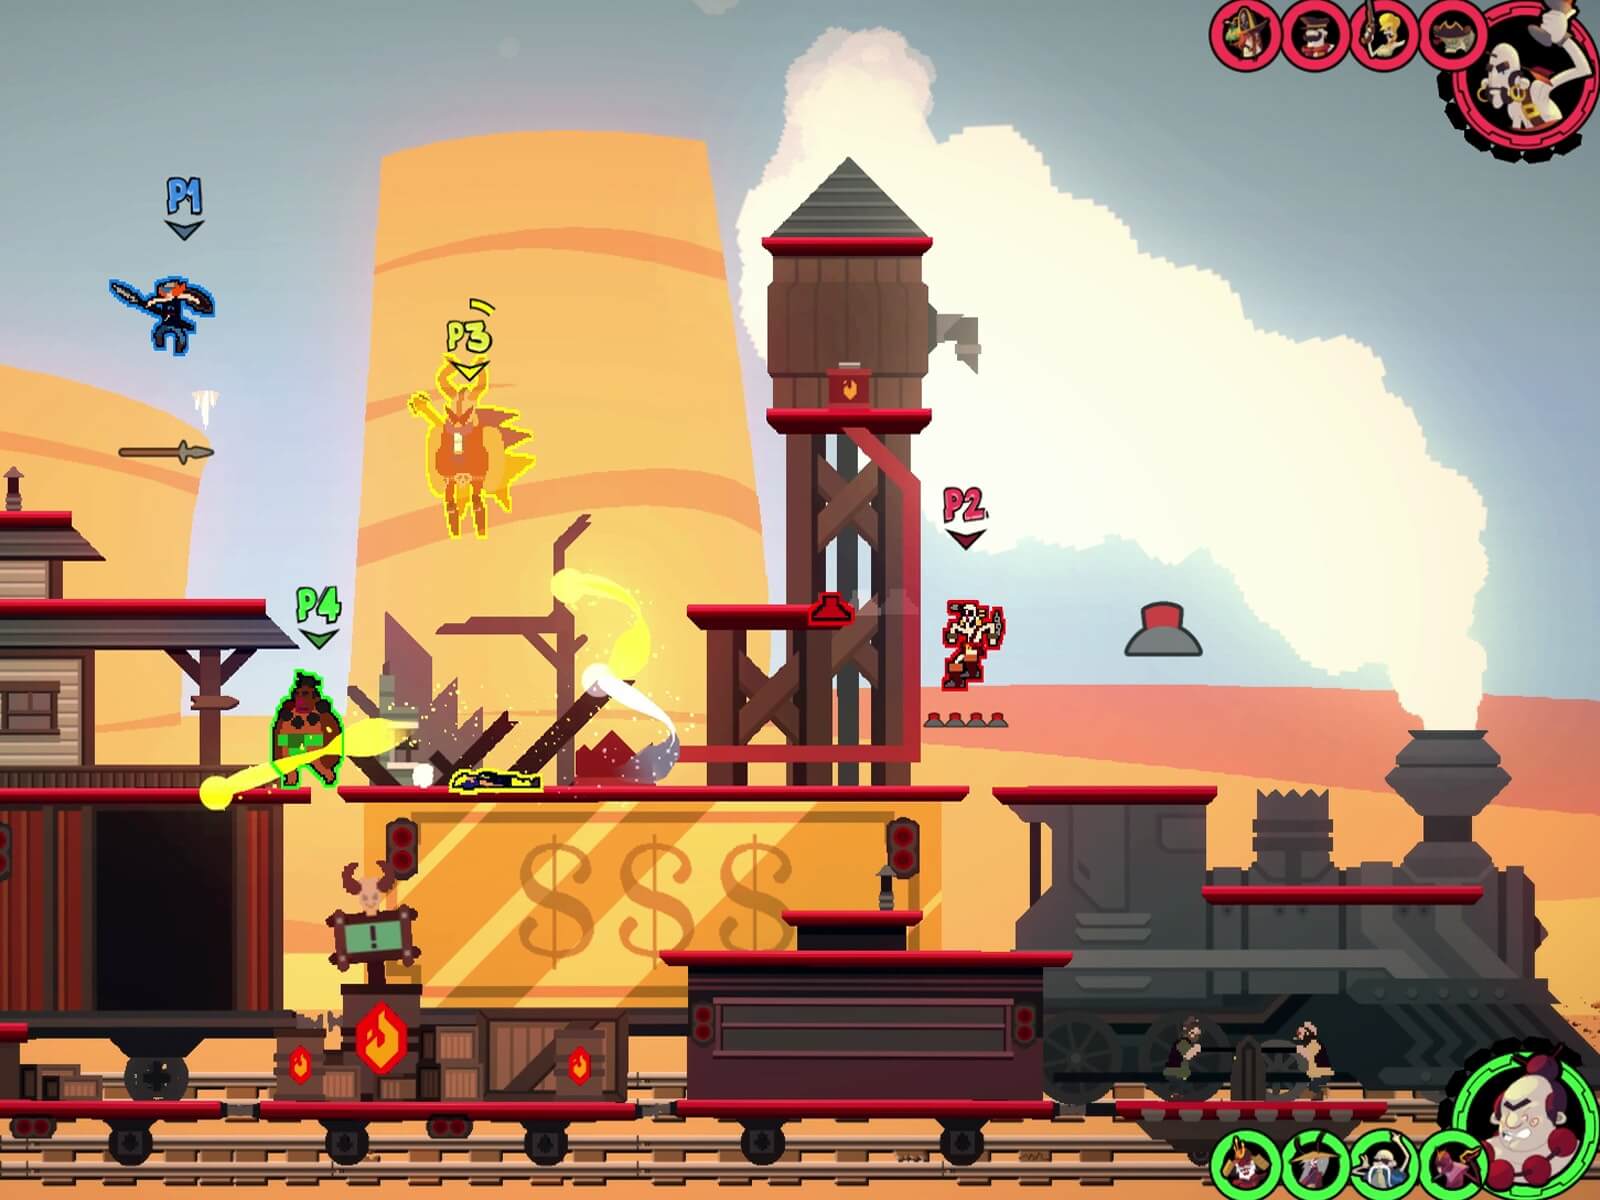 Screenshot from the Kaia Studios game Dynasty Feud, featuring a steam train passing through a western-style town